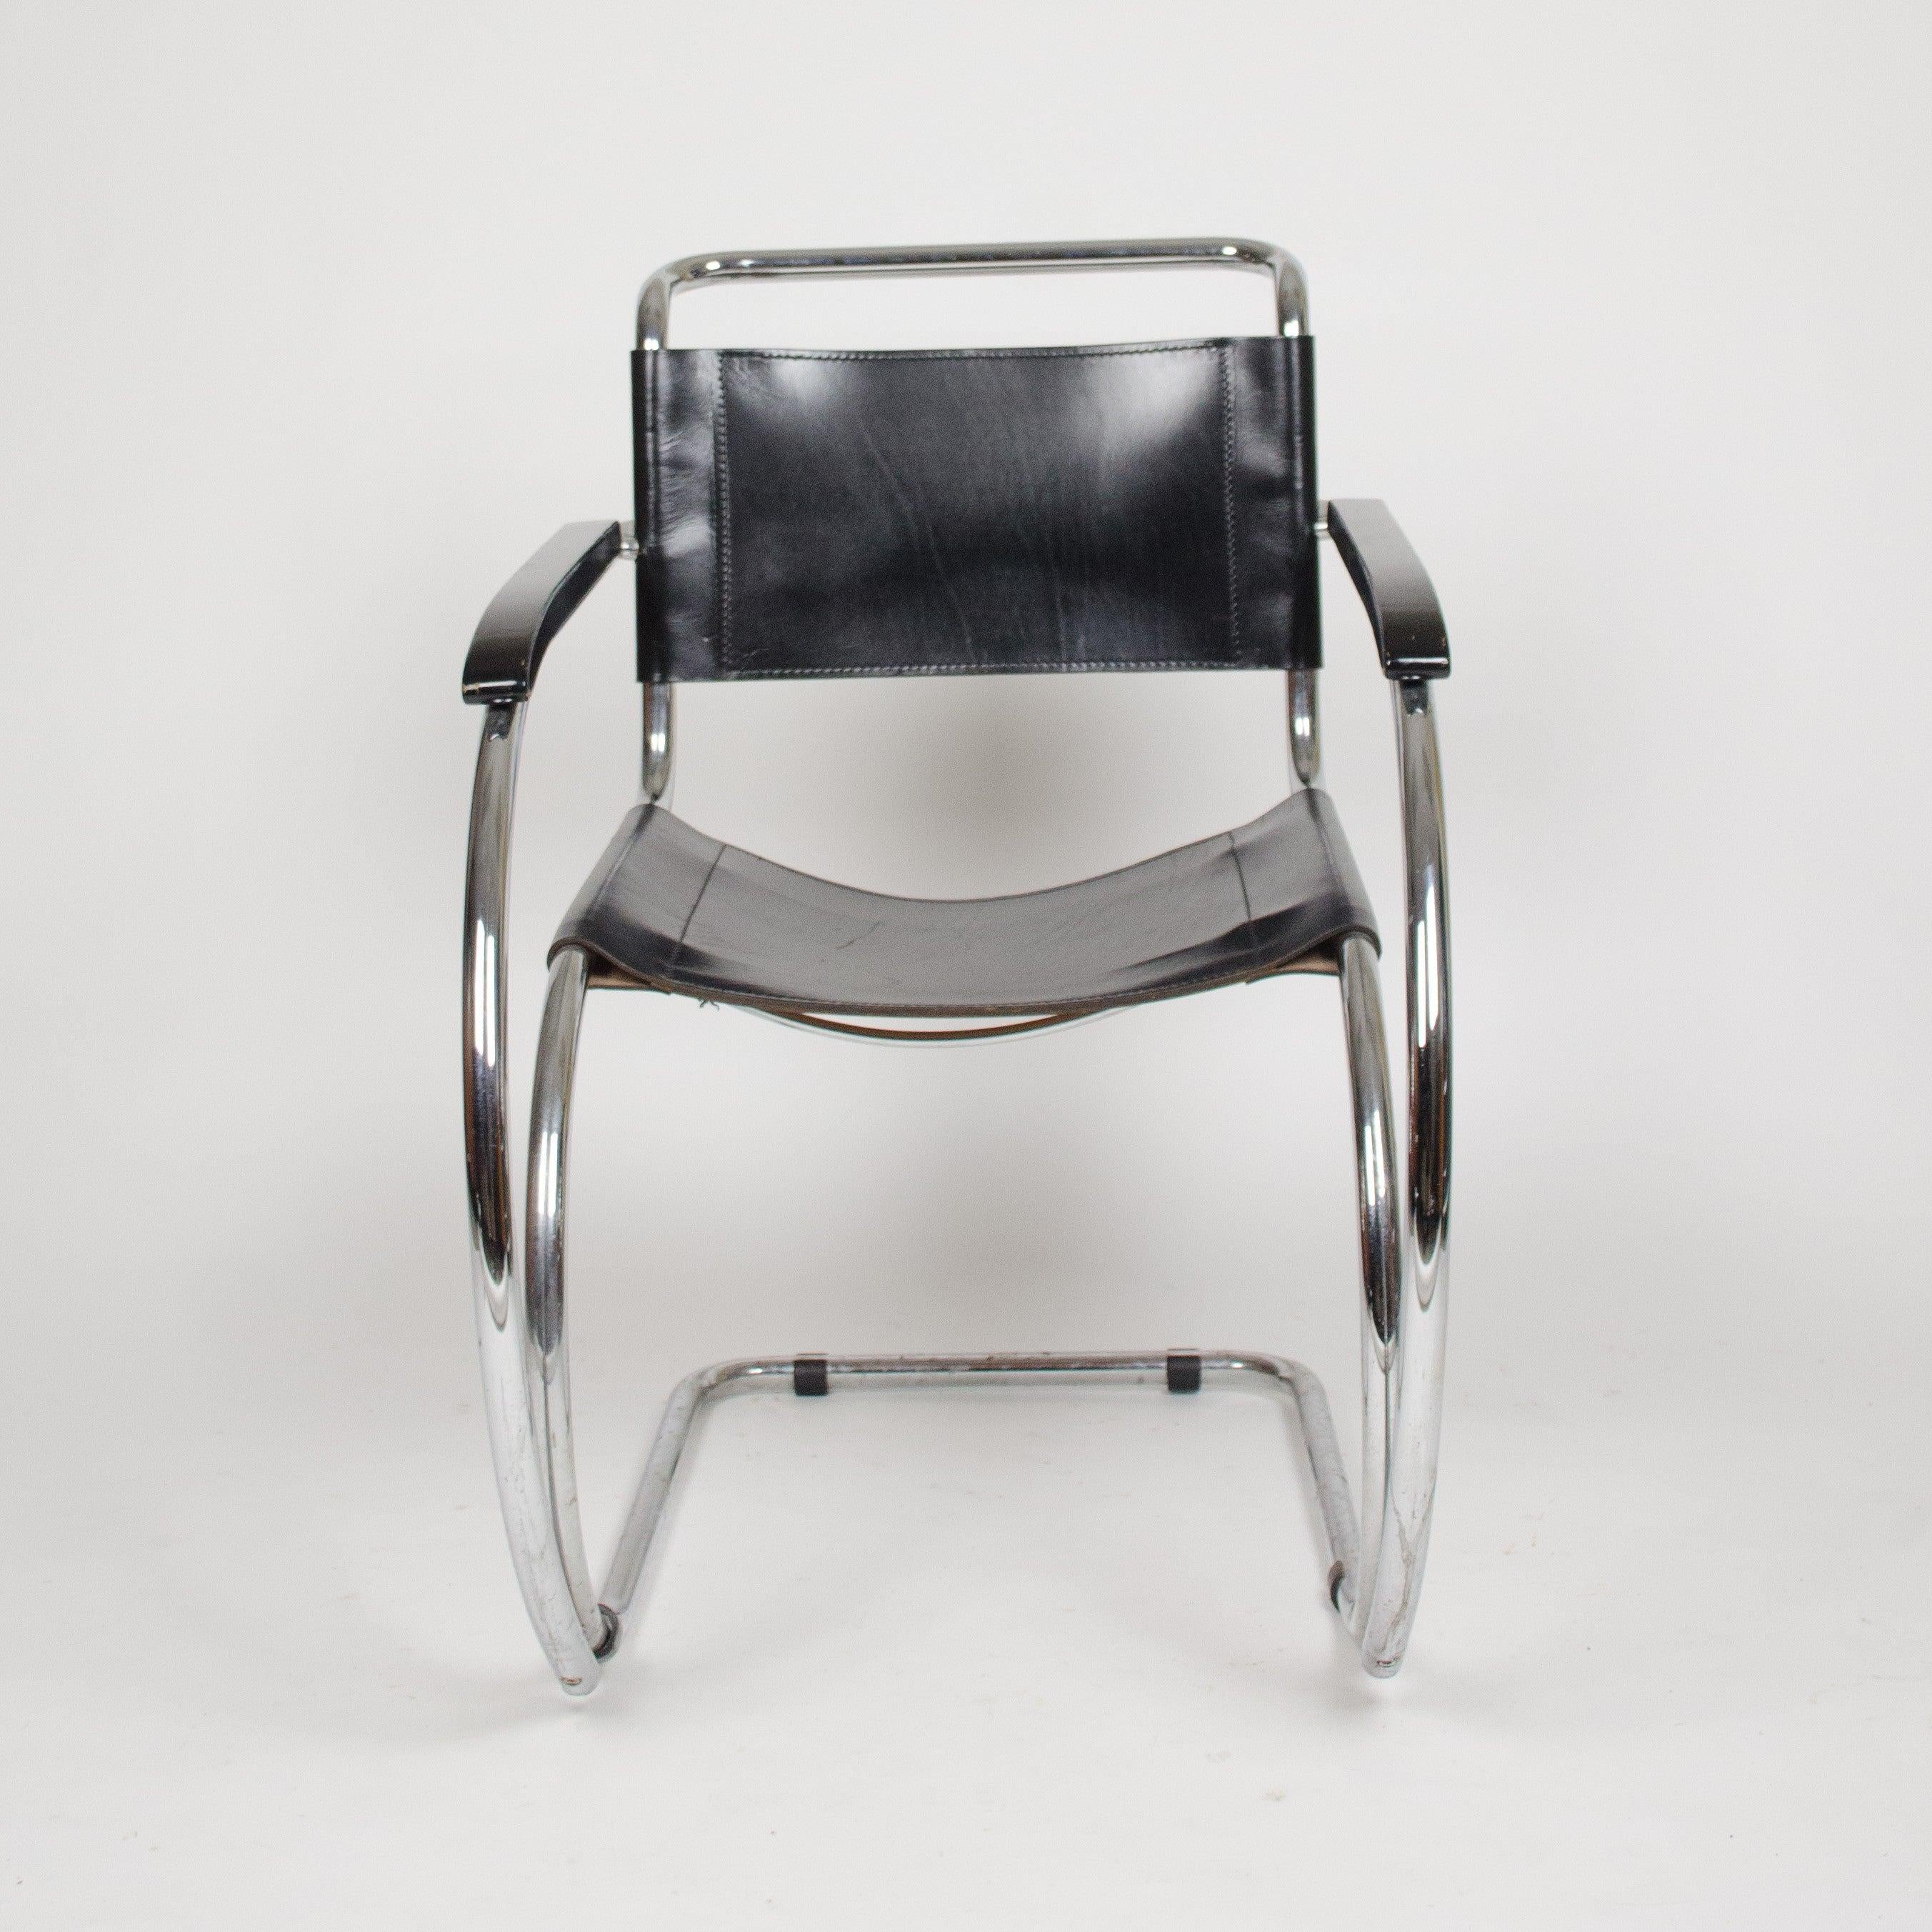 Listed for sale are two pairs of (one pair now available) vintage Mies Van Der Rohe MR20 armchairs in excellent vintage condition. The chairs are black leather and look phenomenal for their age. They show signs of use and light wear to the seats as